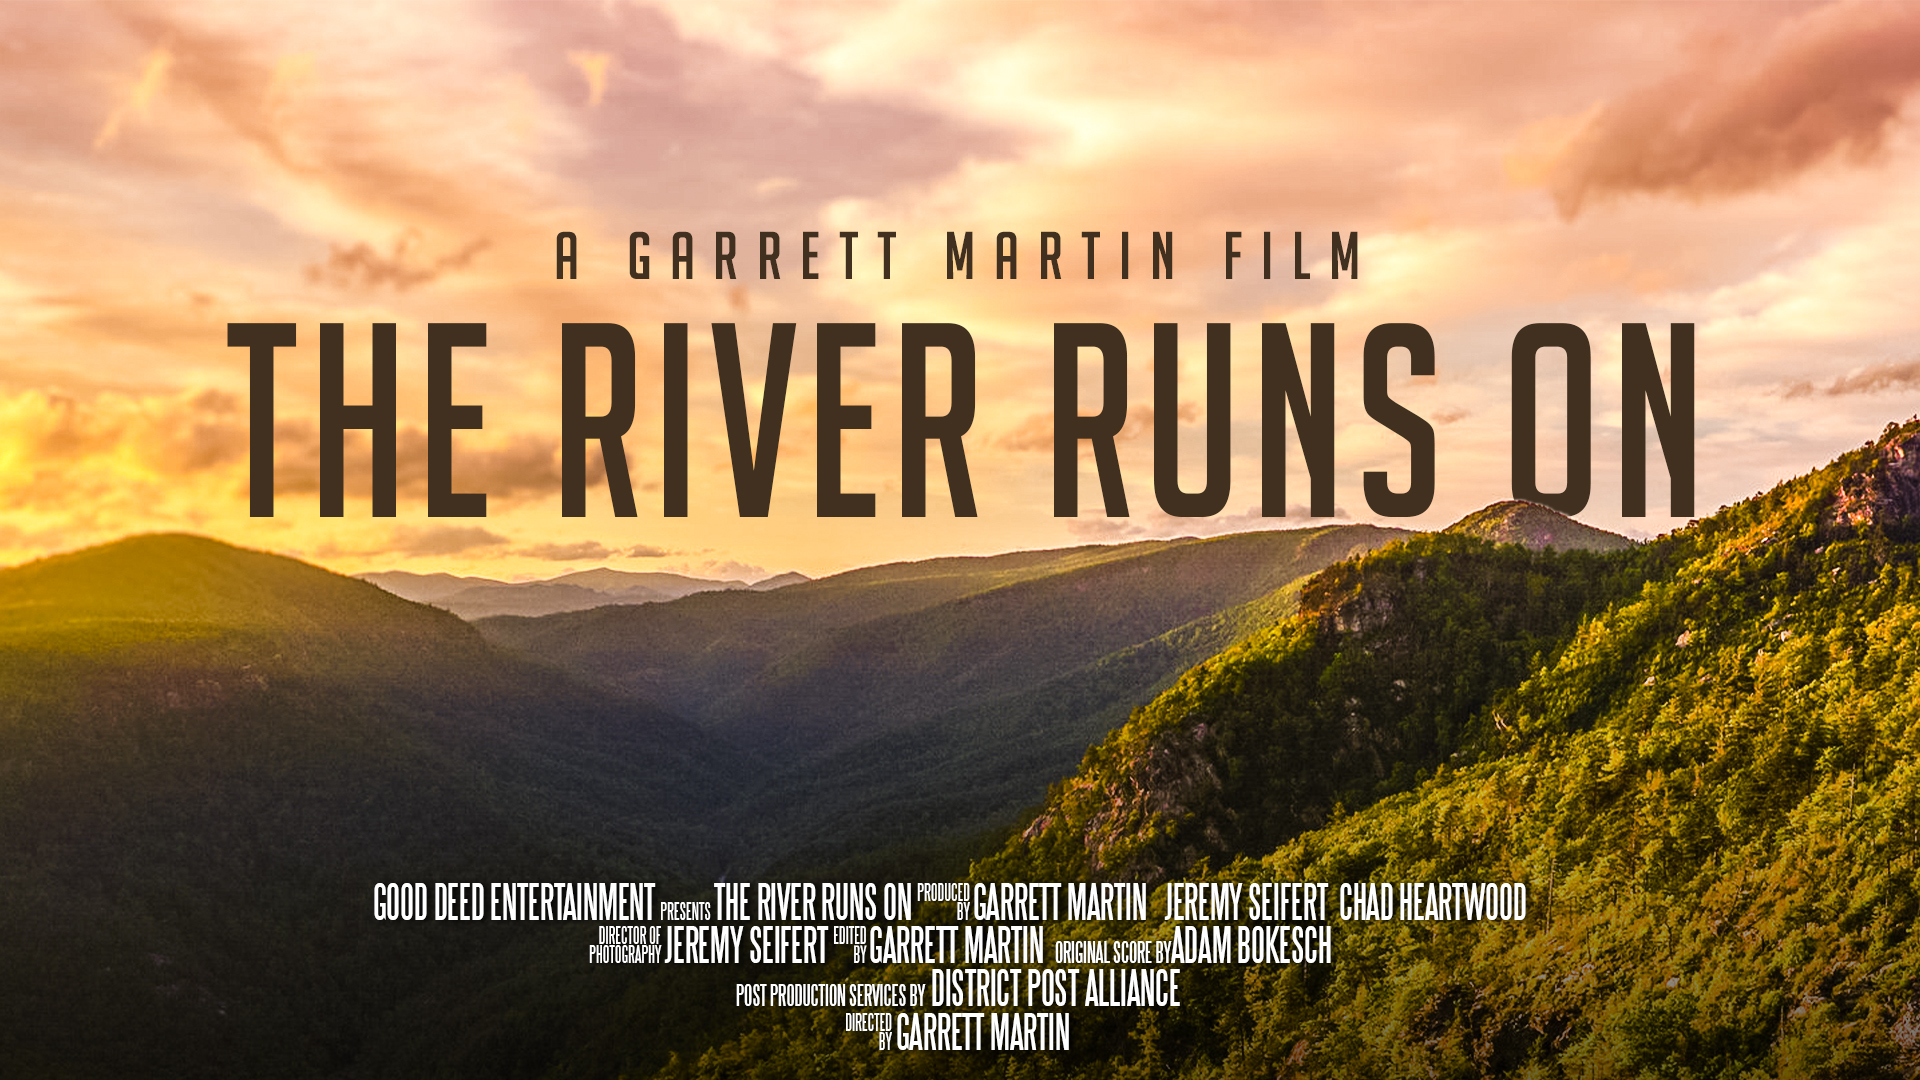 Oct. 13. Join us for The River Runs On Screening in Hendersonville, NC